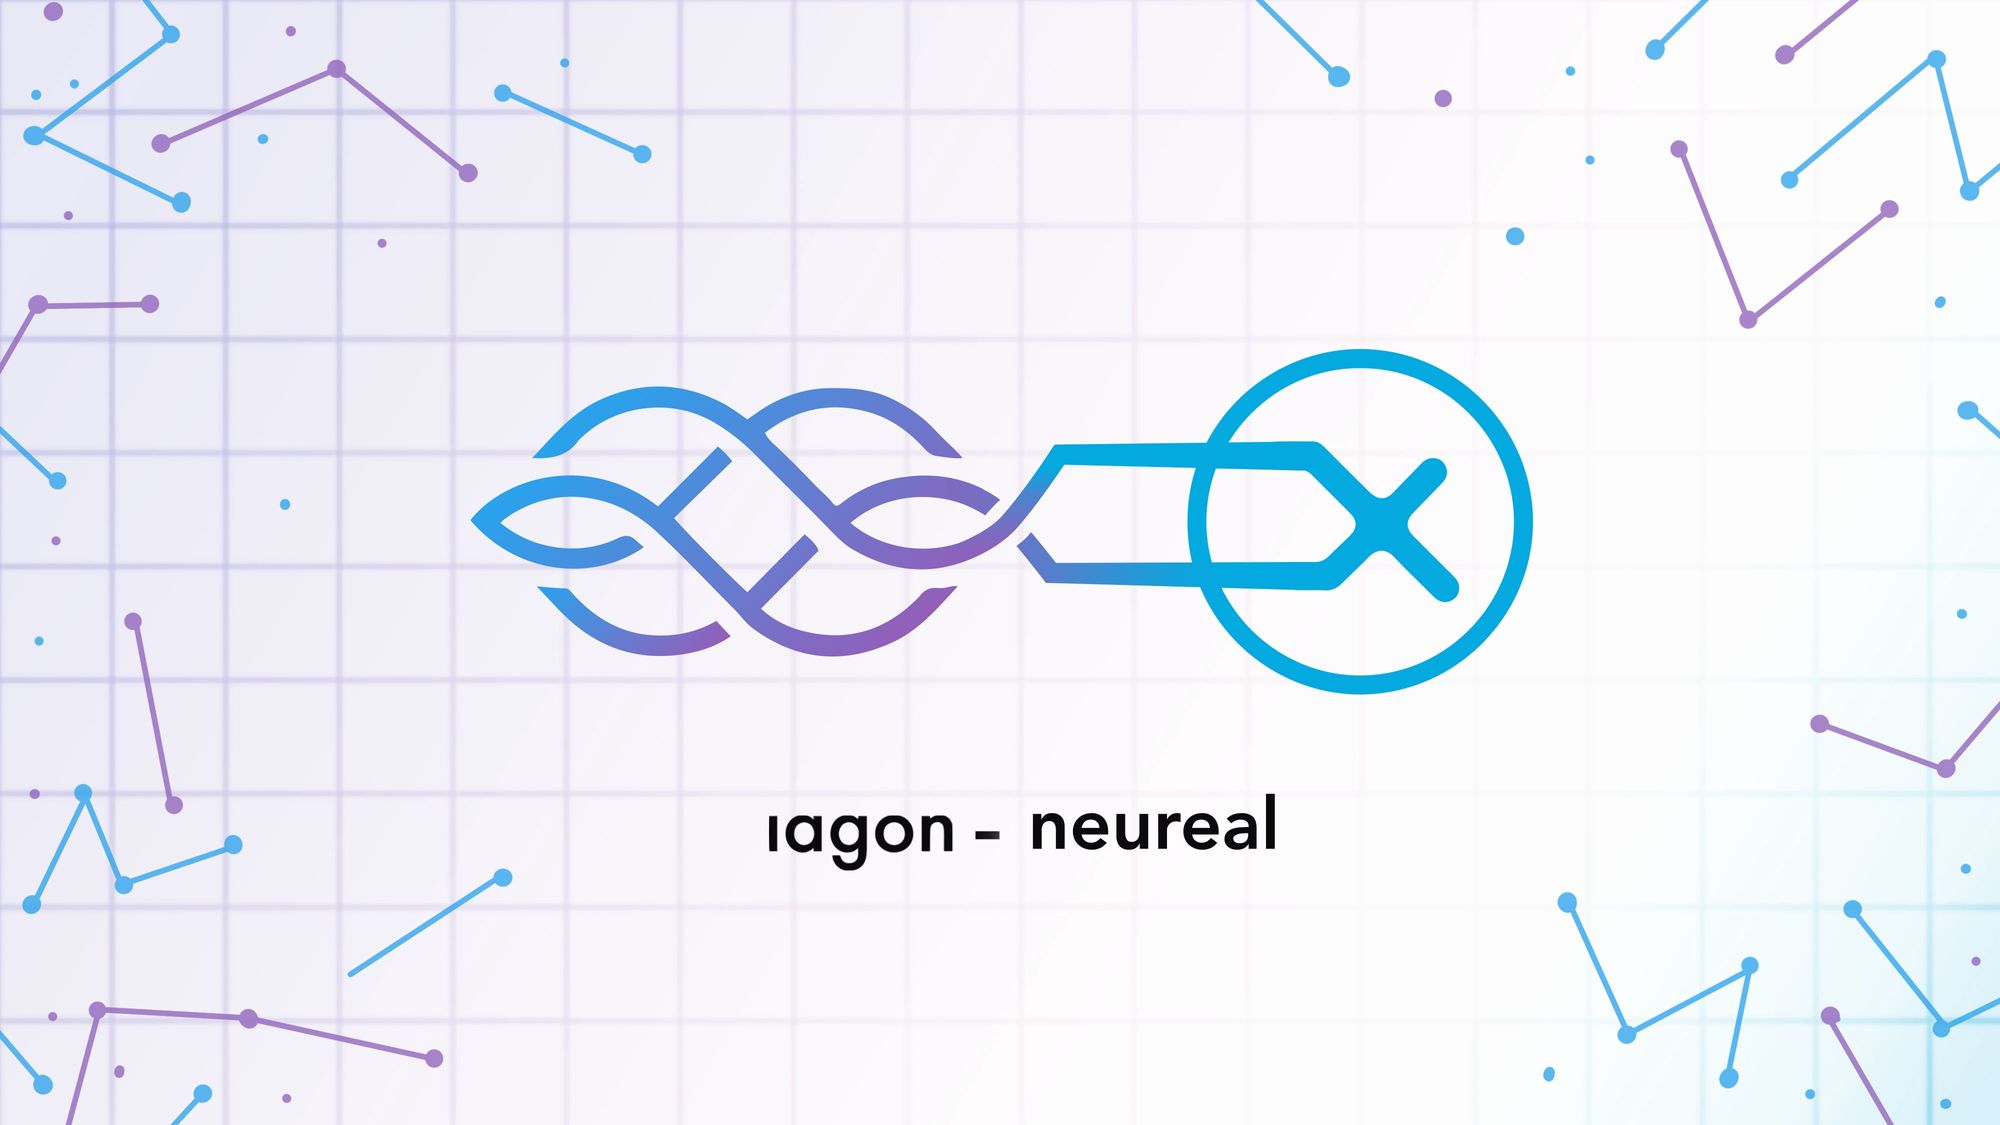 NEUREAL will become an initial adopter of IAGON